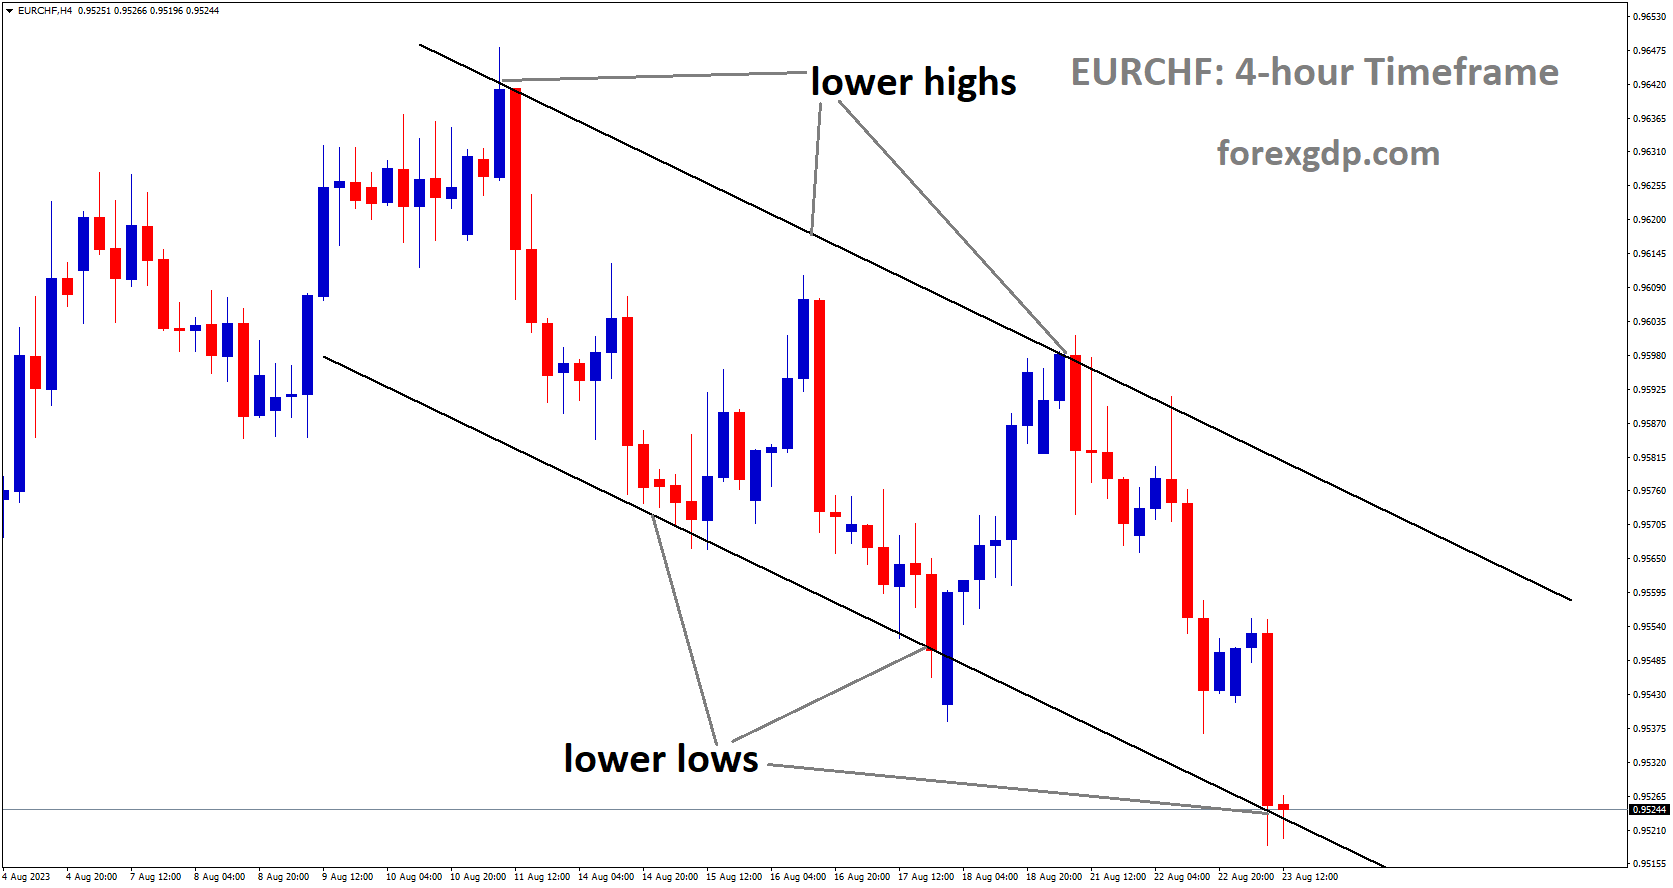 EURCHF is moving in Descending channel and market has reached lower low area of the channel